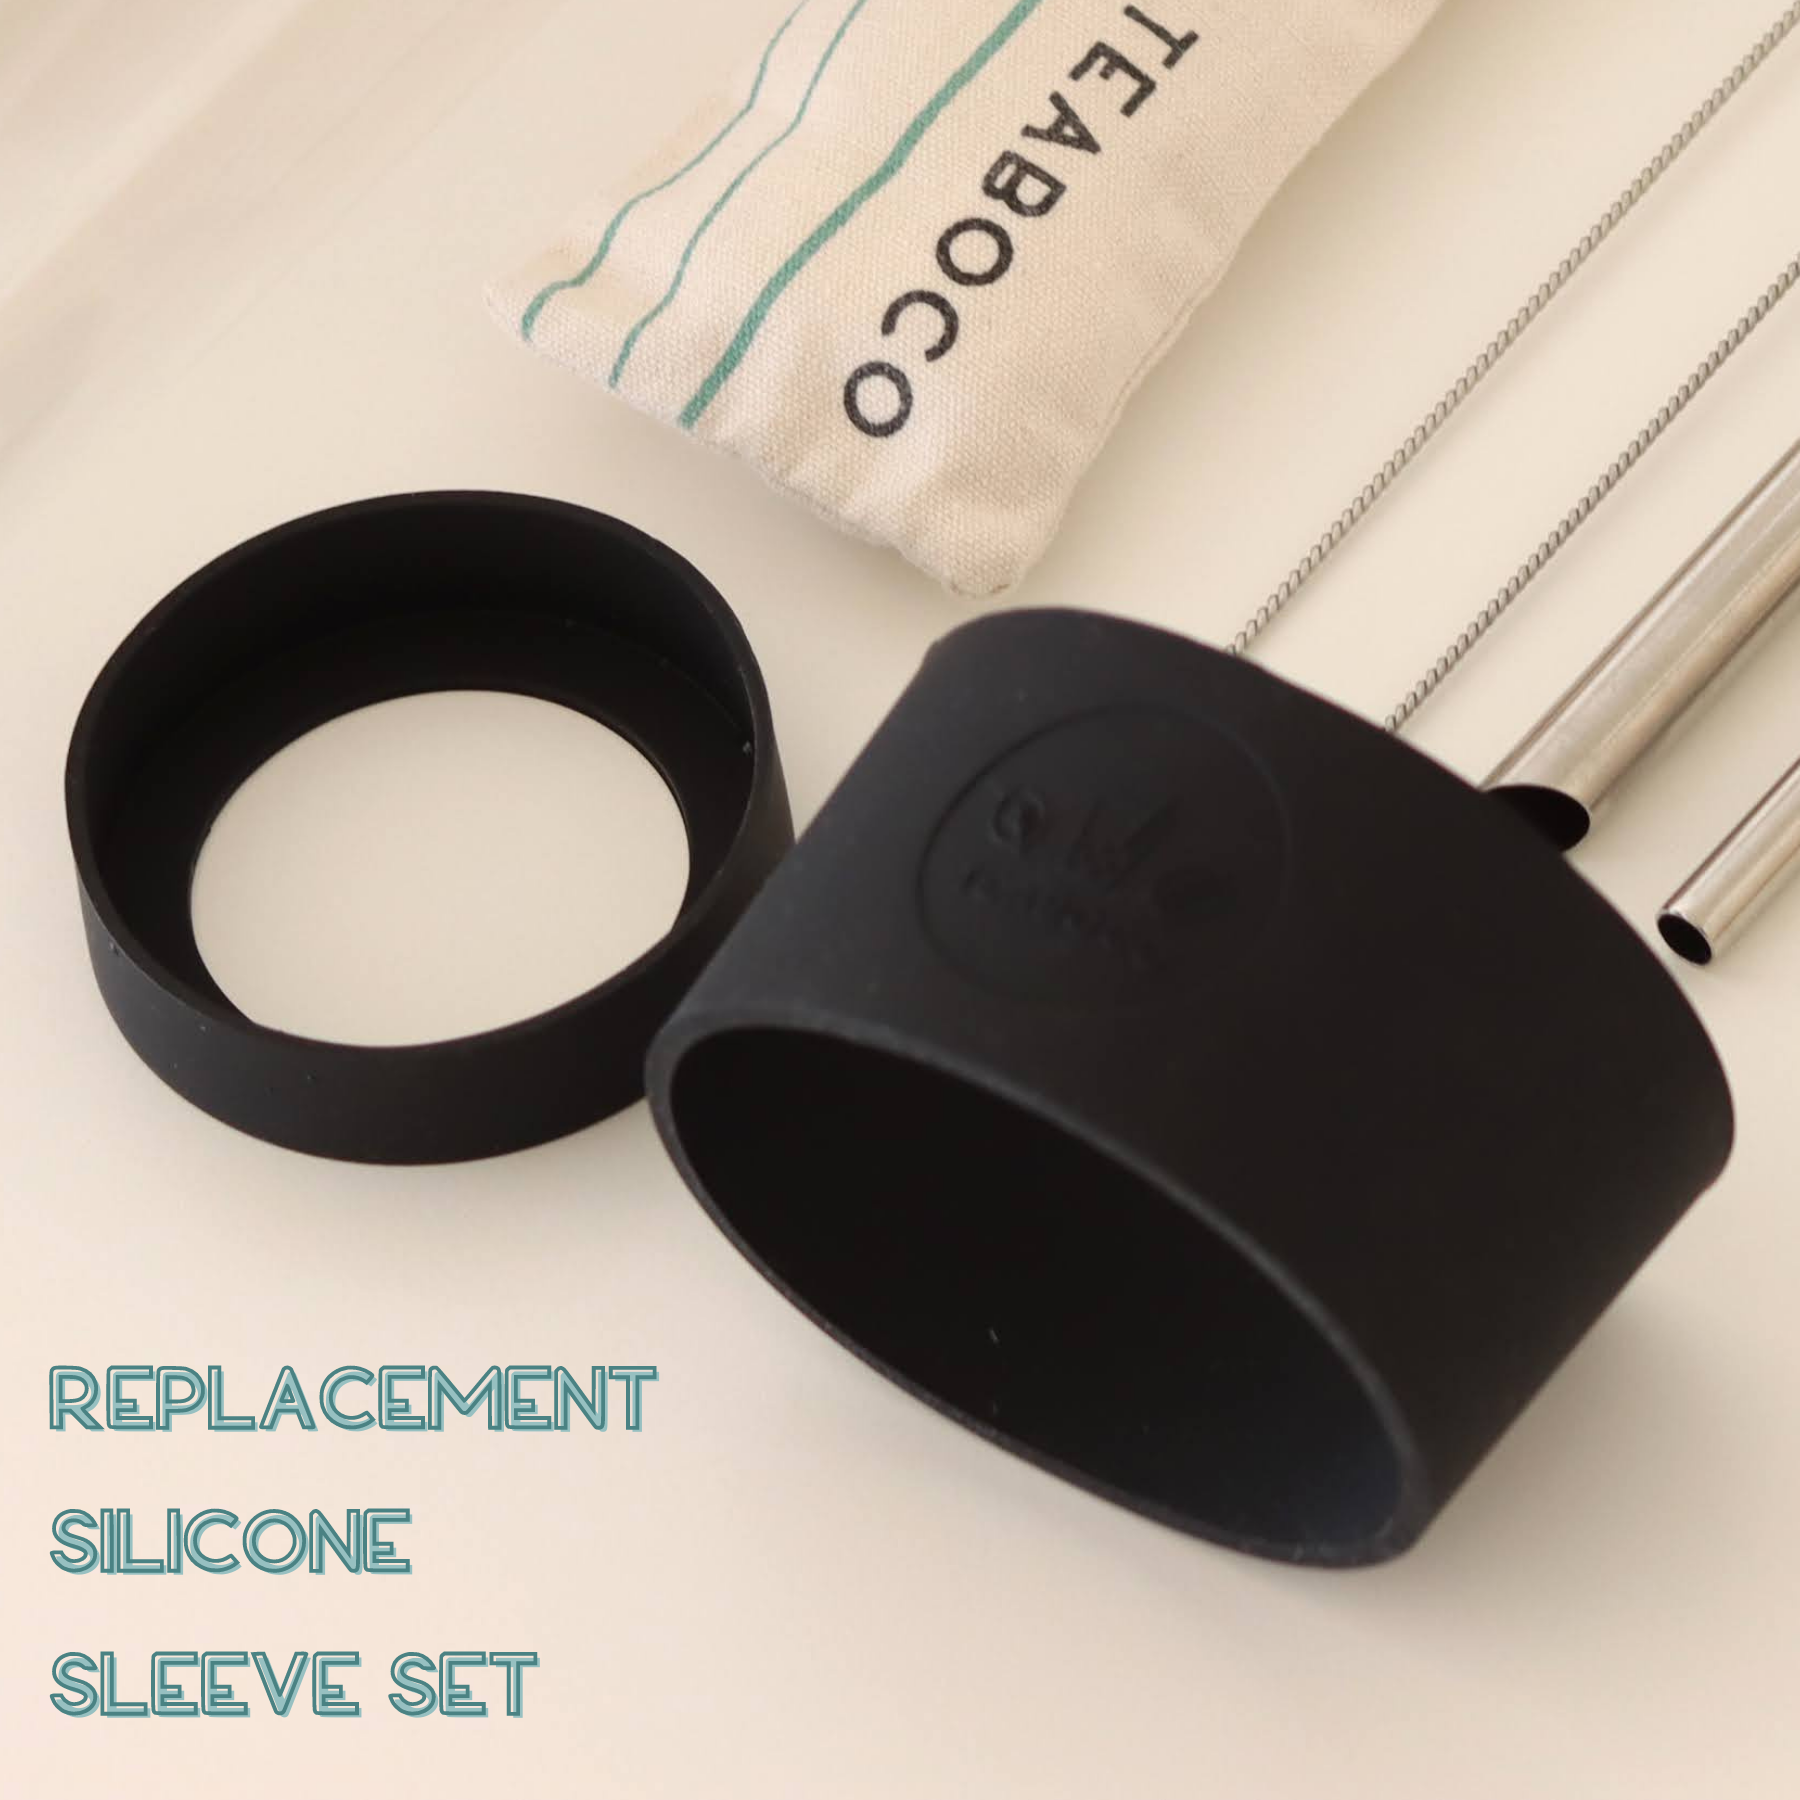 Replacement Silicone Sleeve Set - Teaboco